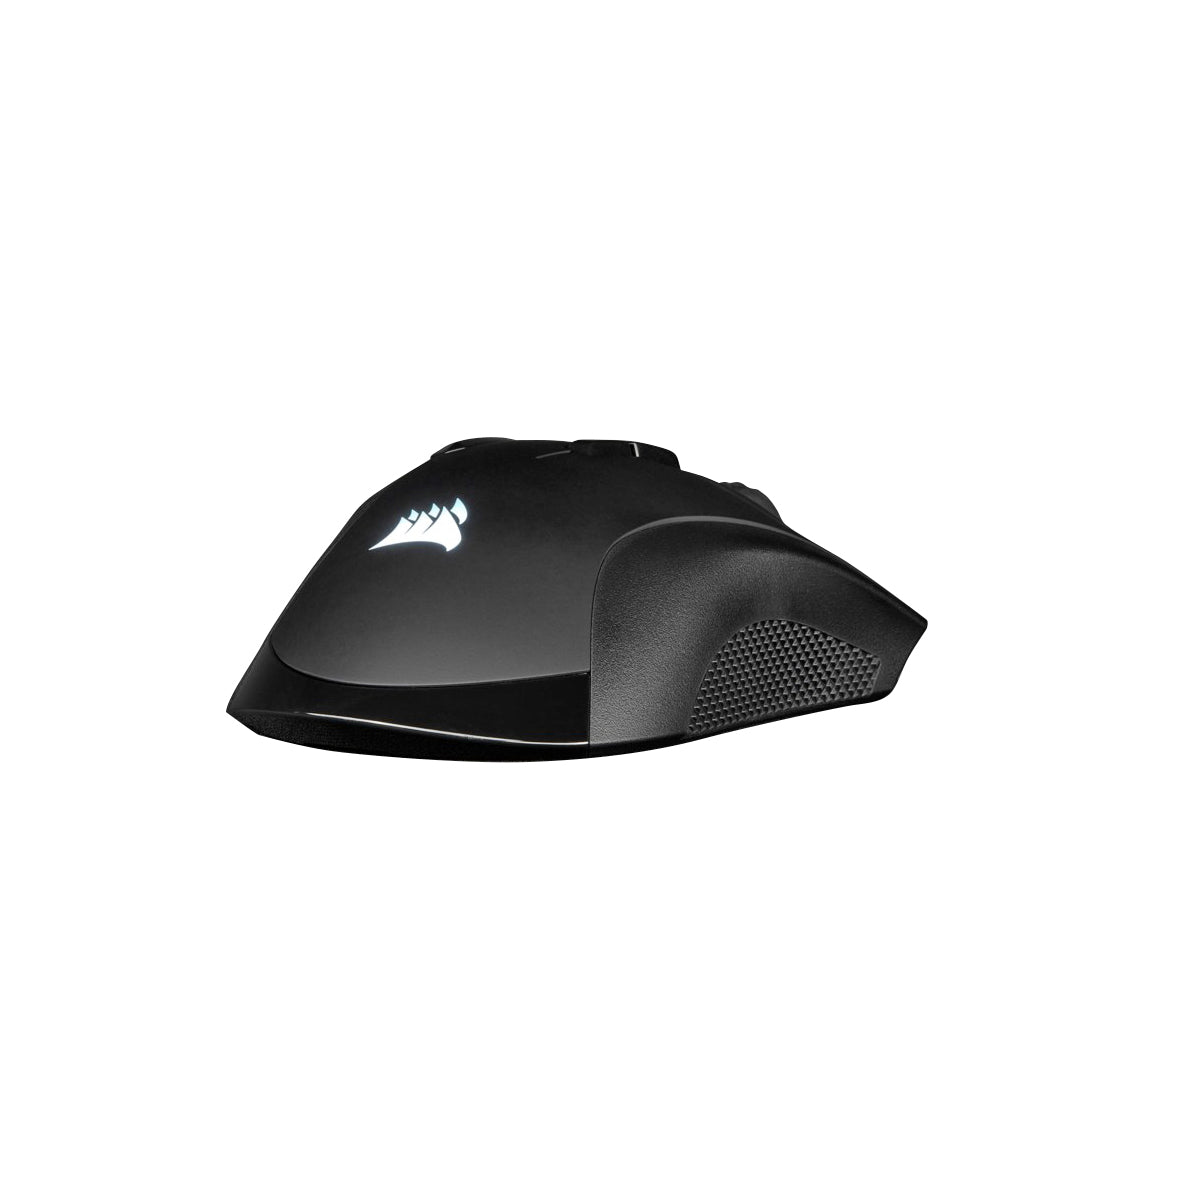 CORSAIR Ironclaw iCUE RGB Wireless Optical Gaming Mouse with 18000 DPI, 10 Programmable Buttons, Slipstream Technology, Ultra-durable Omron Switch and Onboard Profile Storage for PC Computer and Laptop | CH-9317011-AP